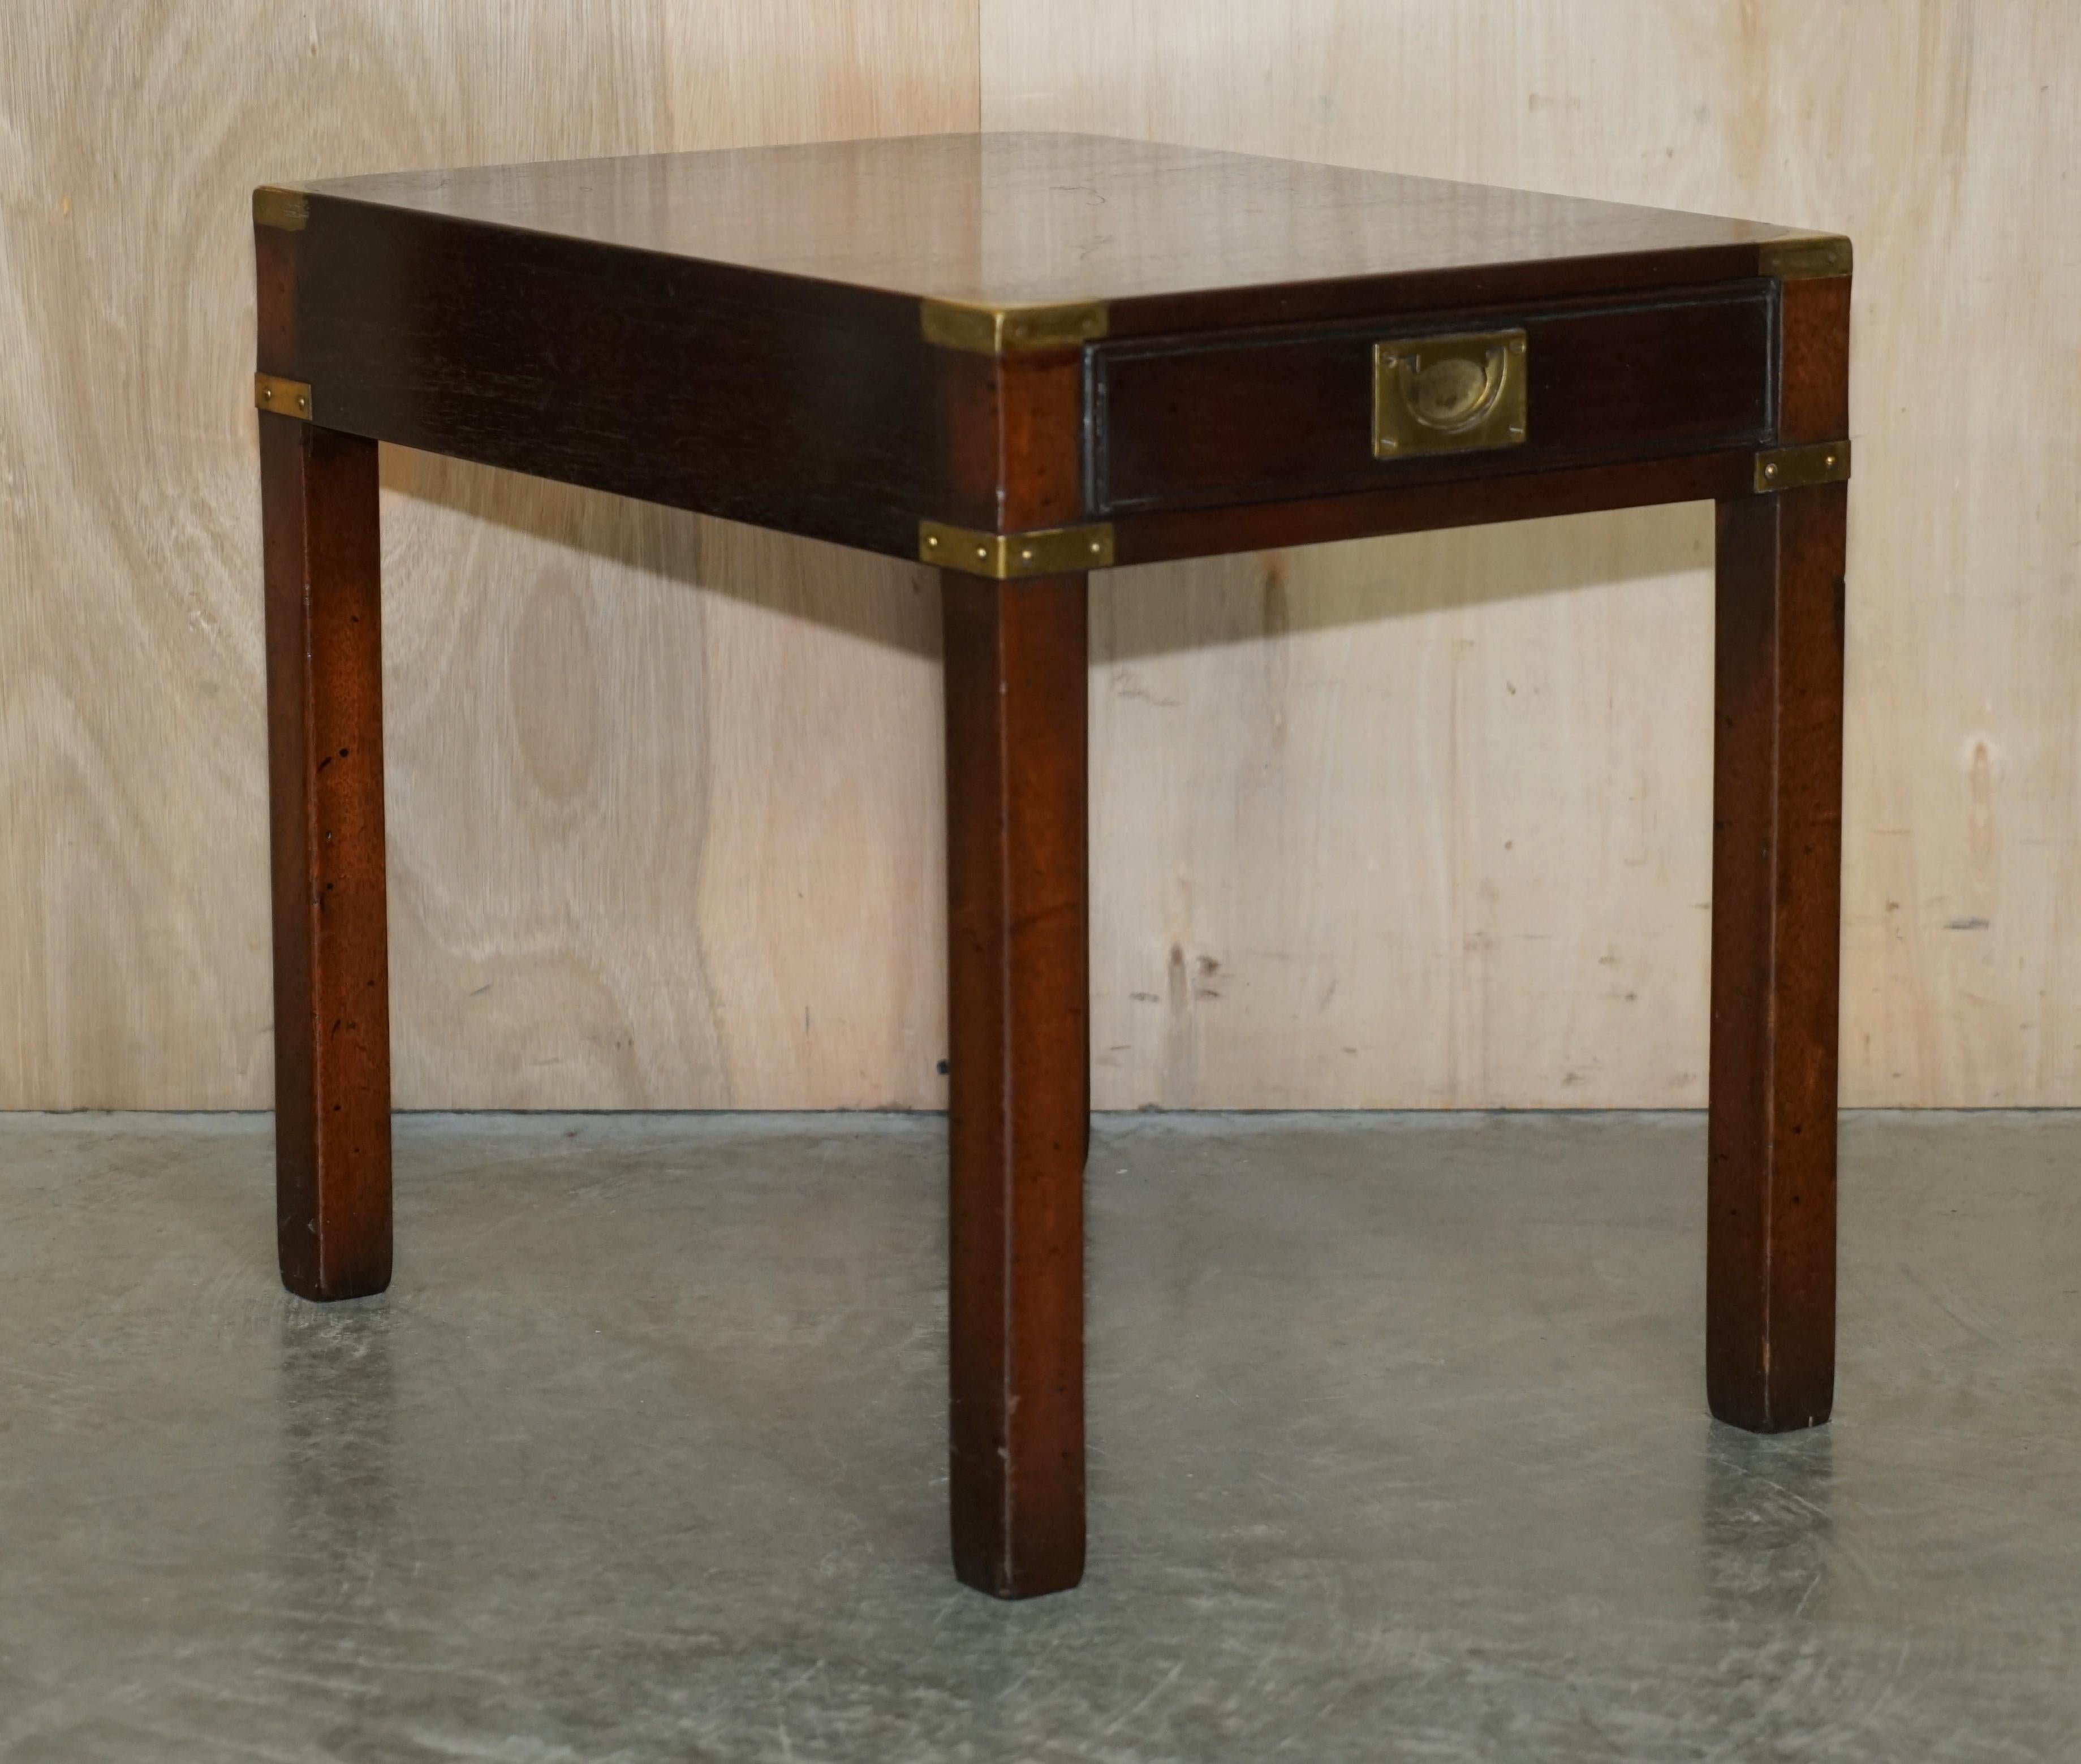 We are delighted to offer for sale this stunning pair of fully restored Kennedy furniture Harrods London Military Campaign side tables with full sized single drawers

A good looking and well-made pair, these are absolutely iconic and highly